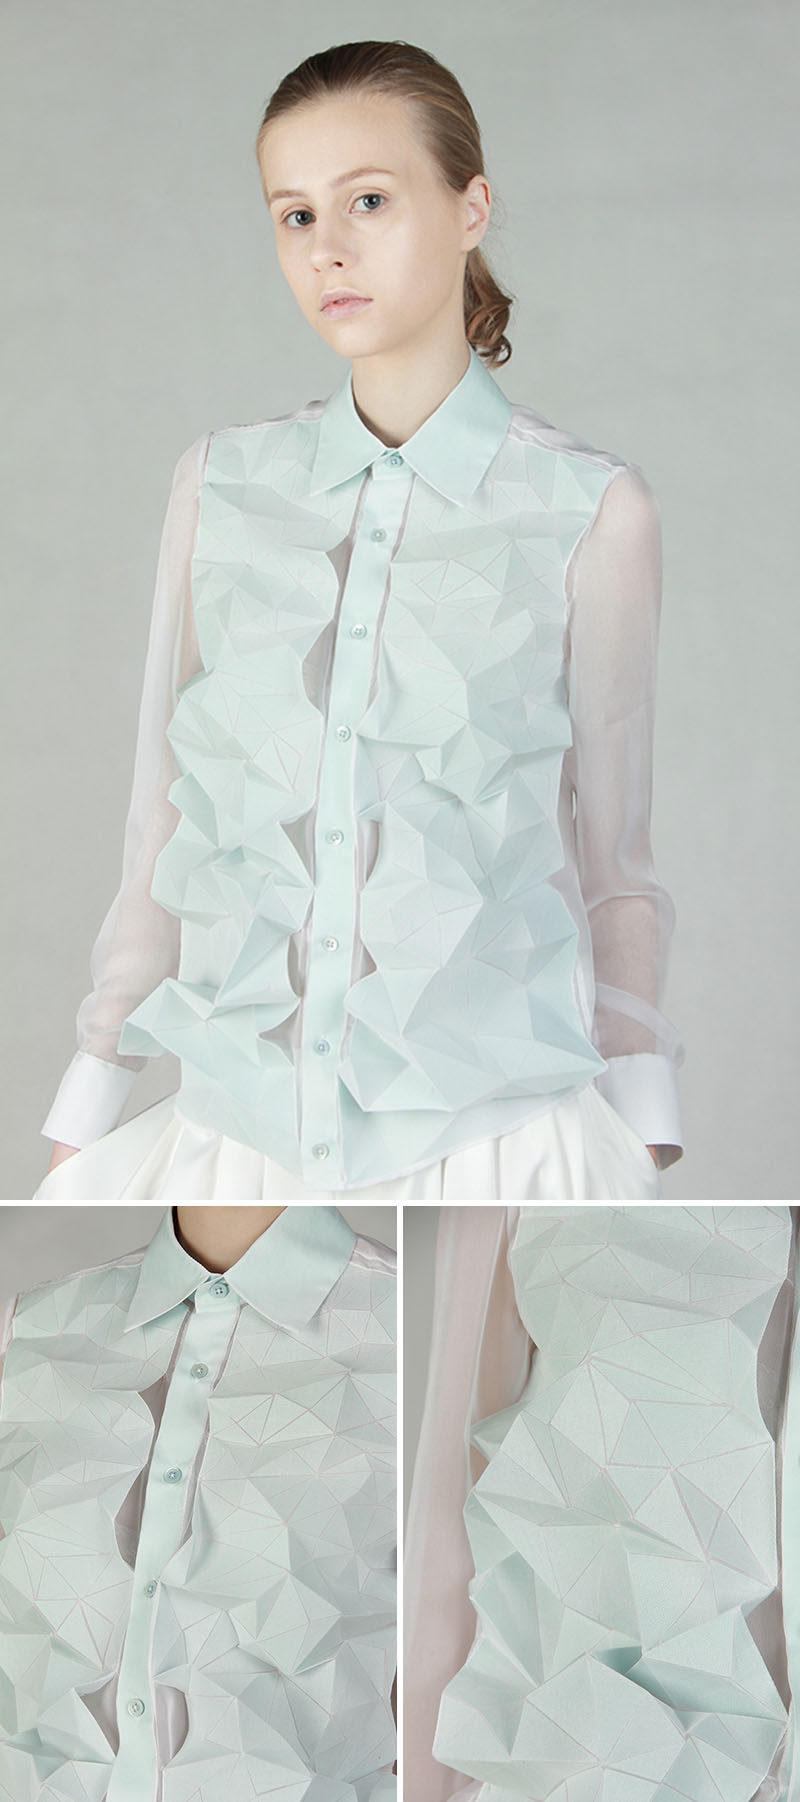 This light, pastel colored shirt made from soft material, has folds and geometric shapes on it that give it an origami look and adds structure to the soft fabric. #Fashion #Style #Origami #OrigamiFashion #Design